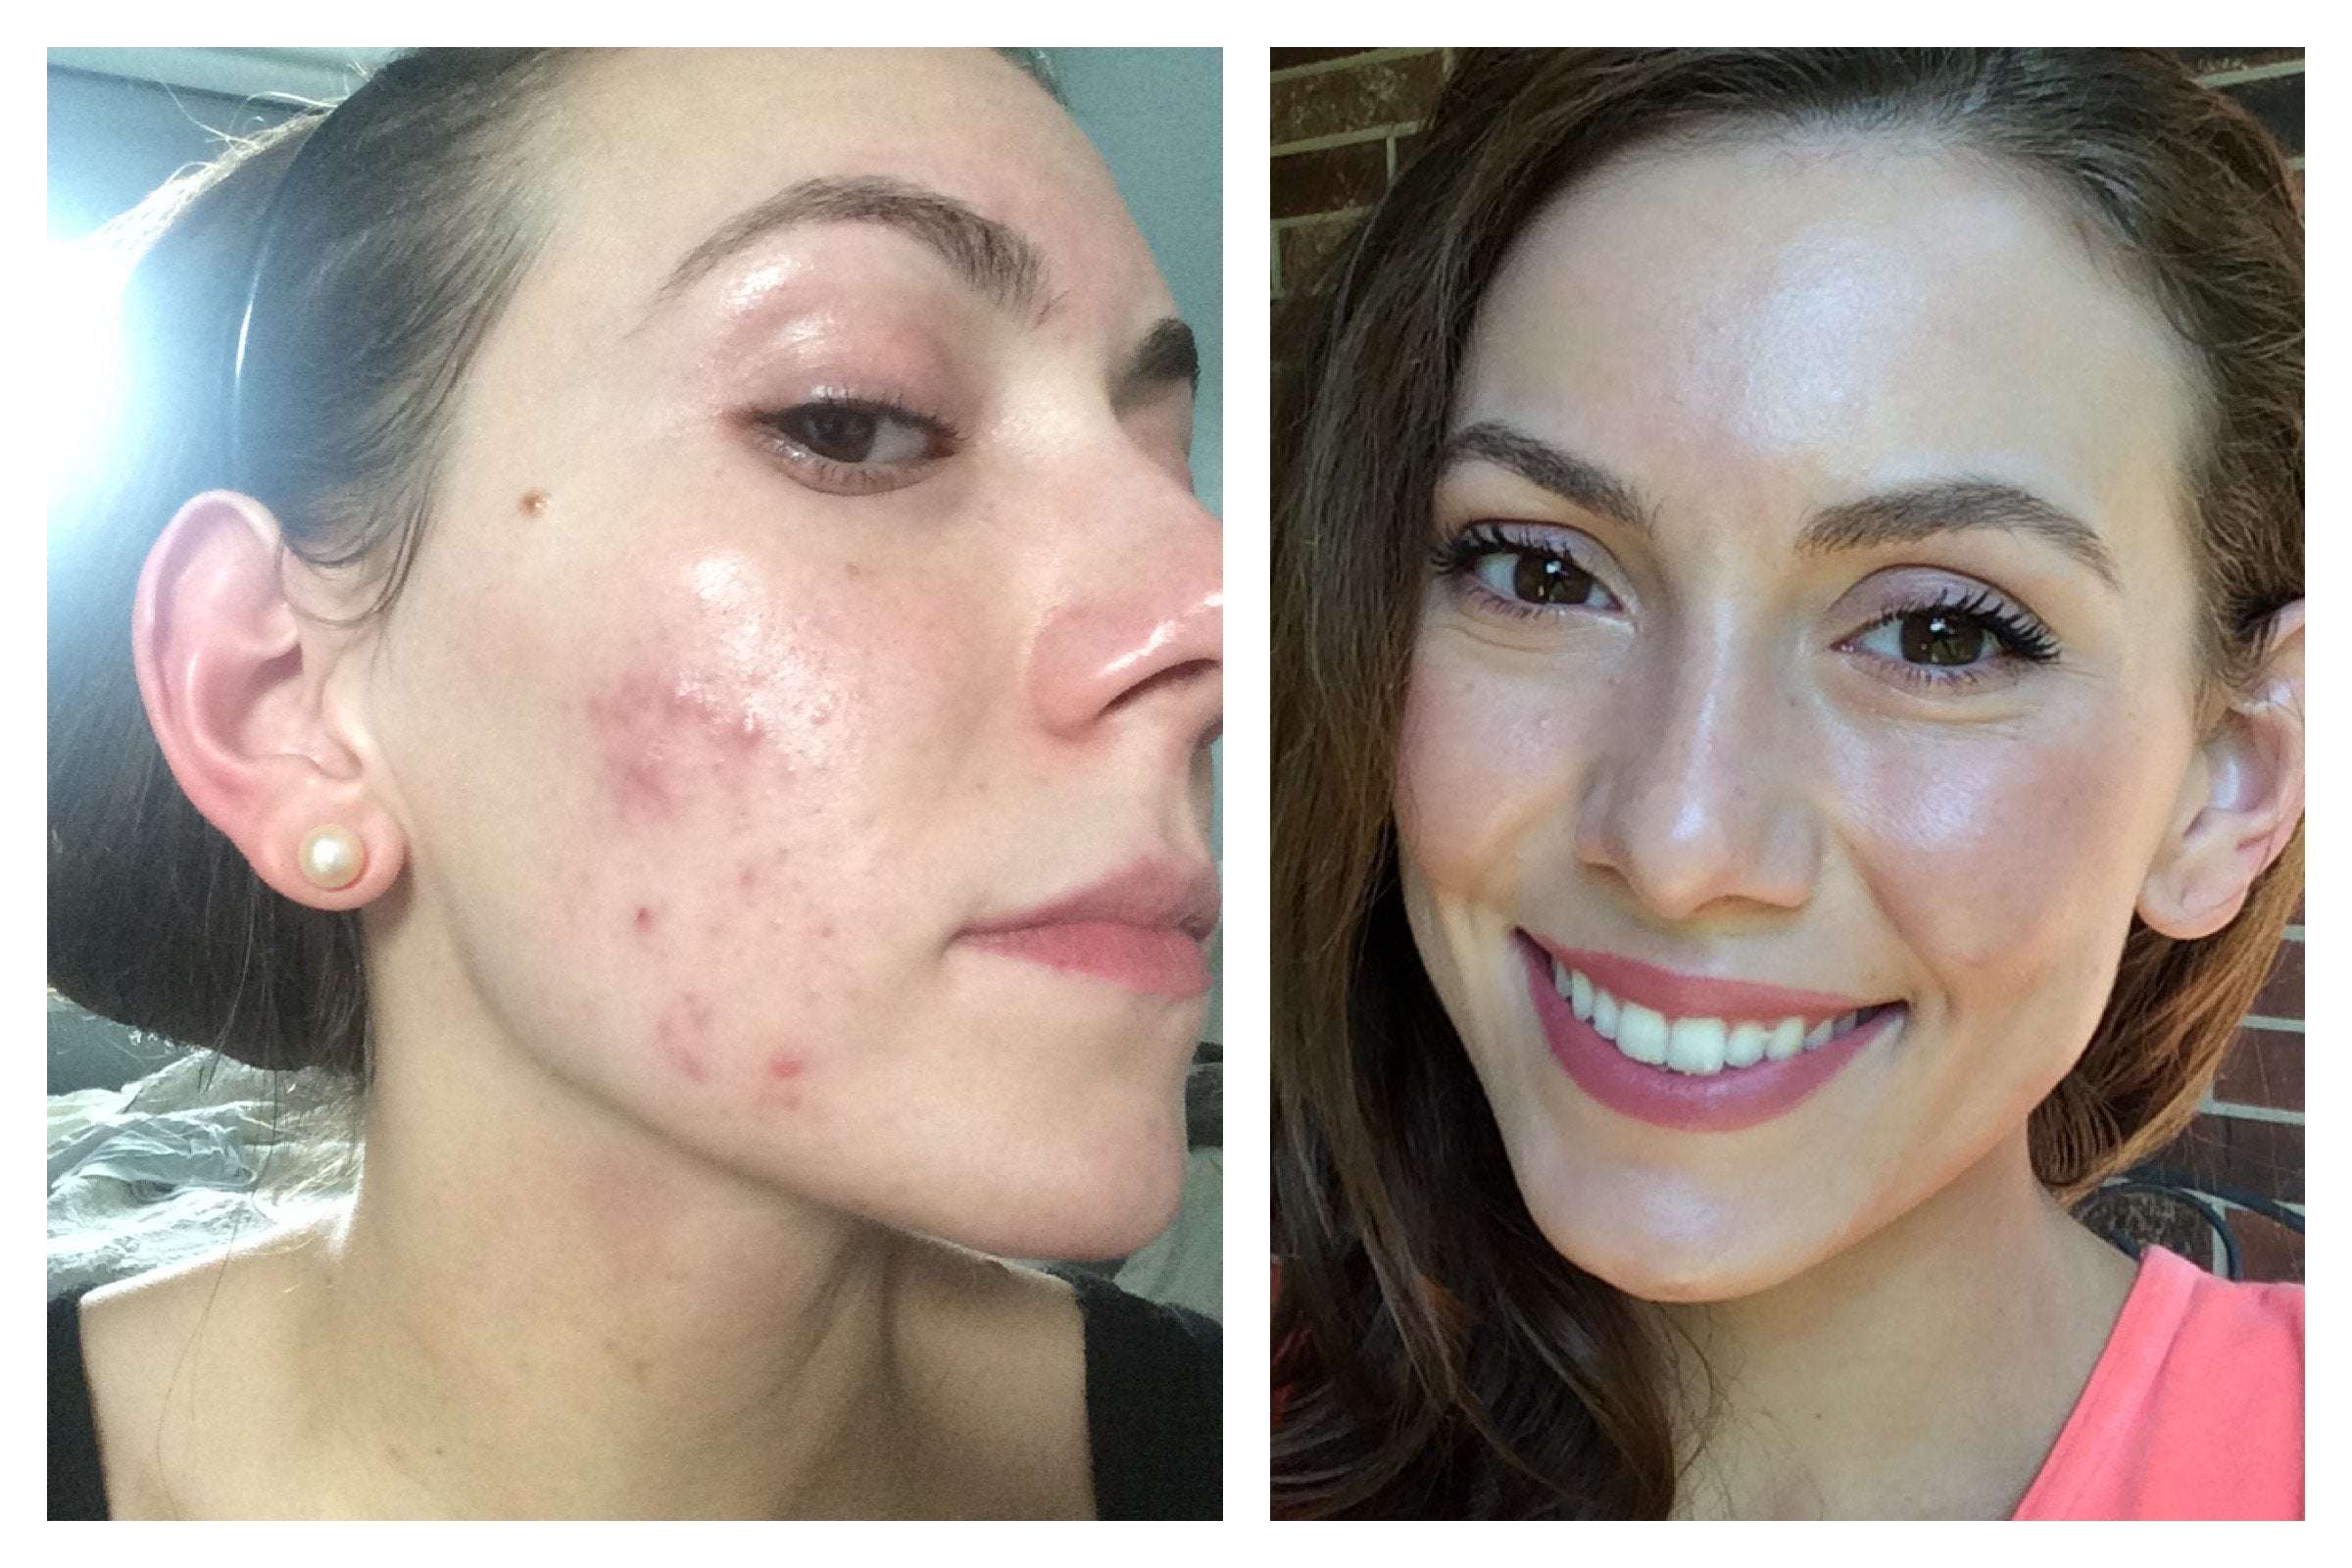 [Before& After] 6 months of hormonal acne treatment later ...